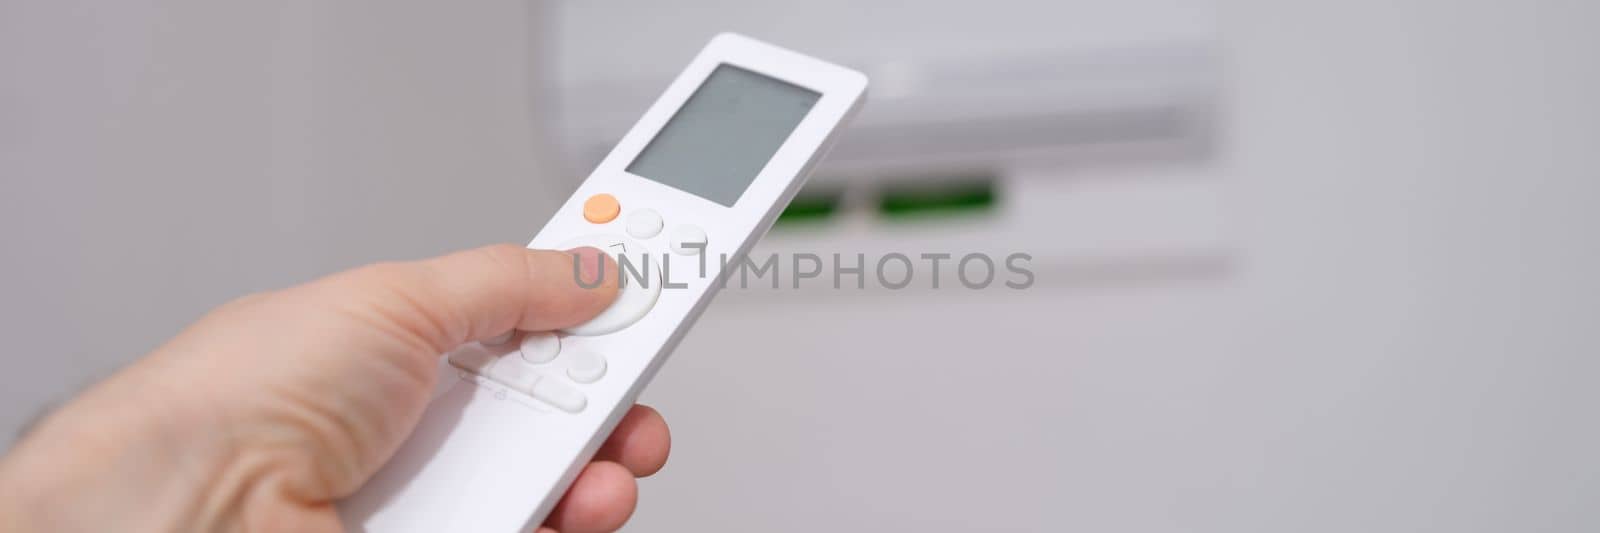 Operation of air conditioner from remote control in hand. Universal remote control for climate control